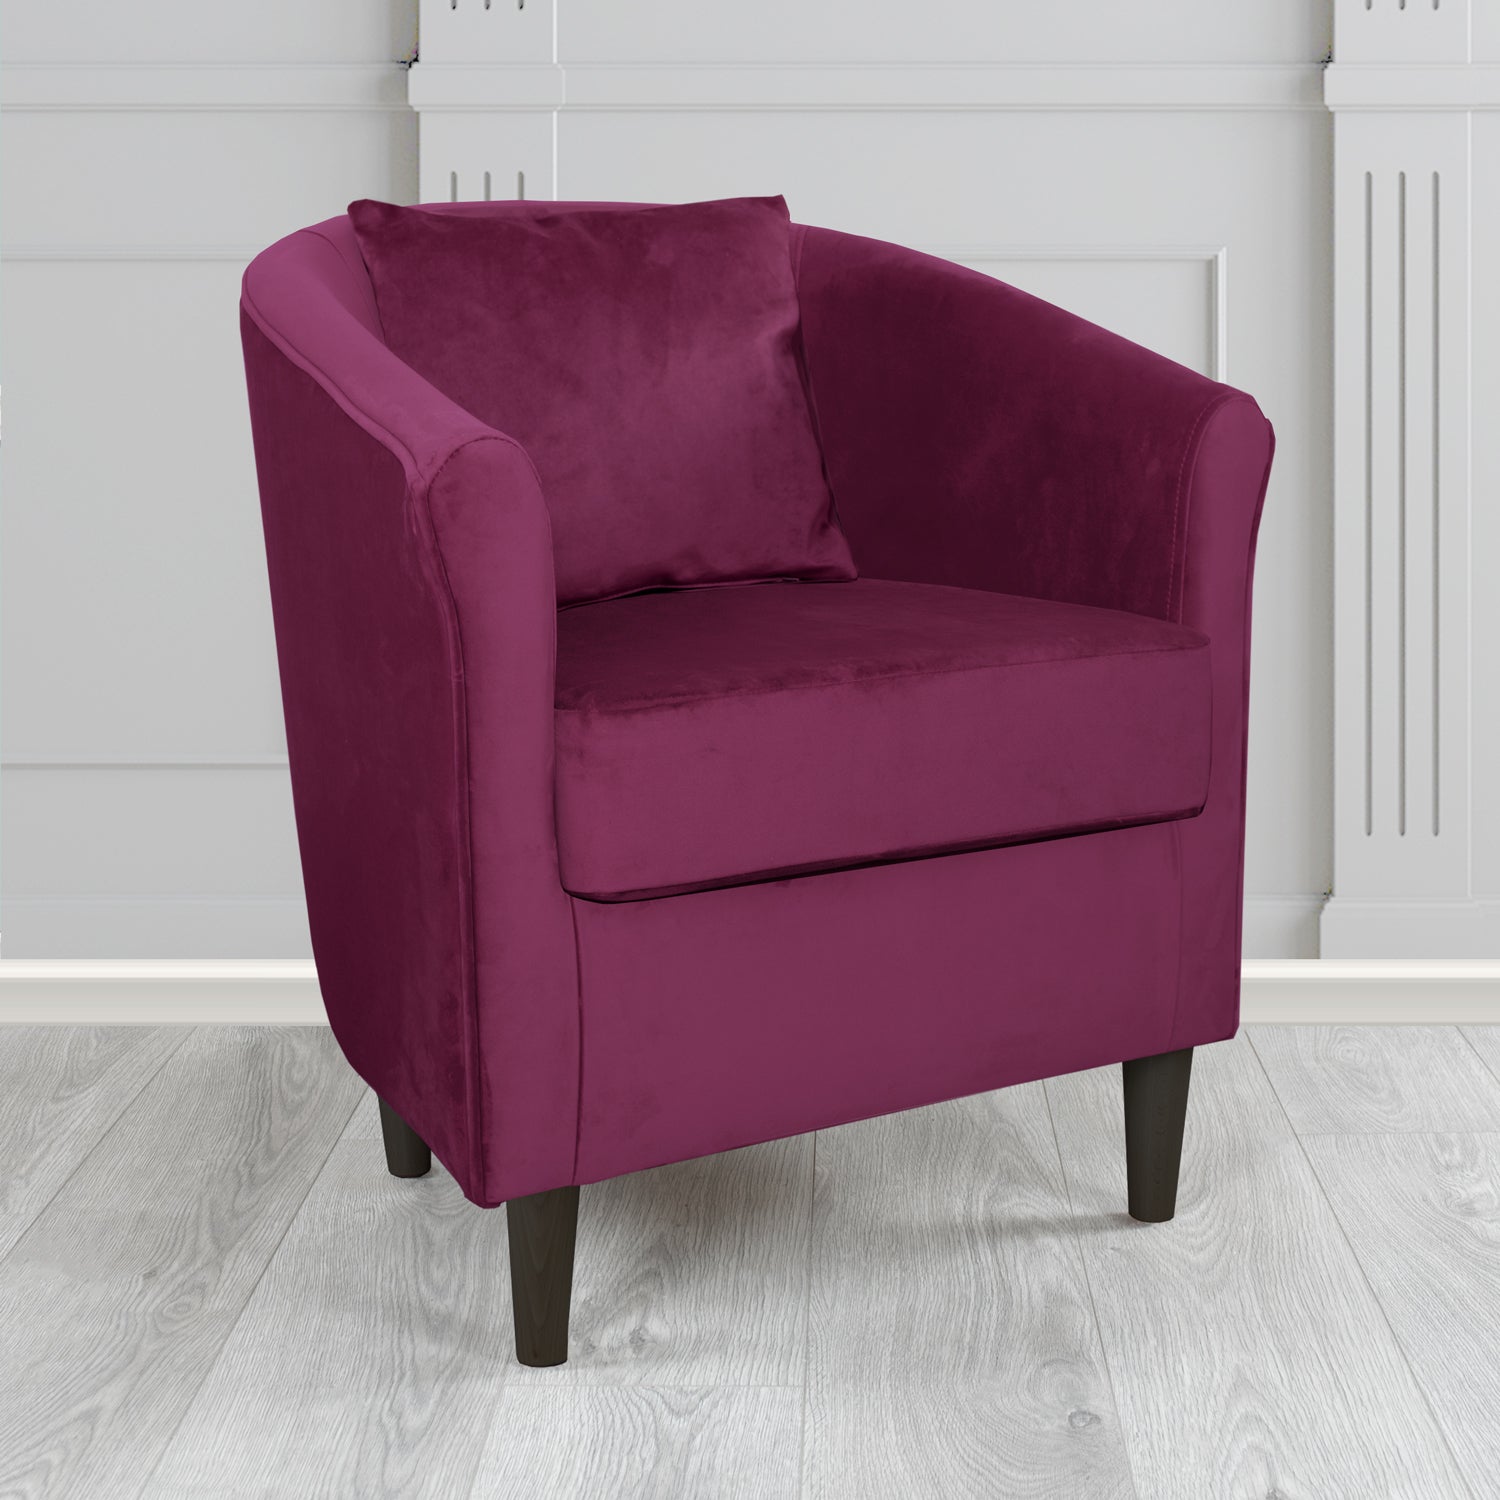 Express St Tropez Monaco Amethyst Plush Velvet Fabric Tub Chair with Scatter Cushion (6604803604522)